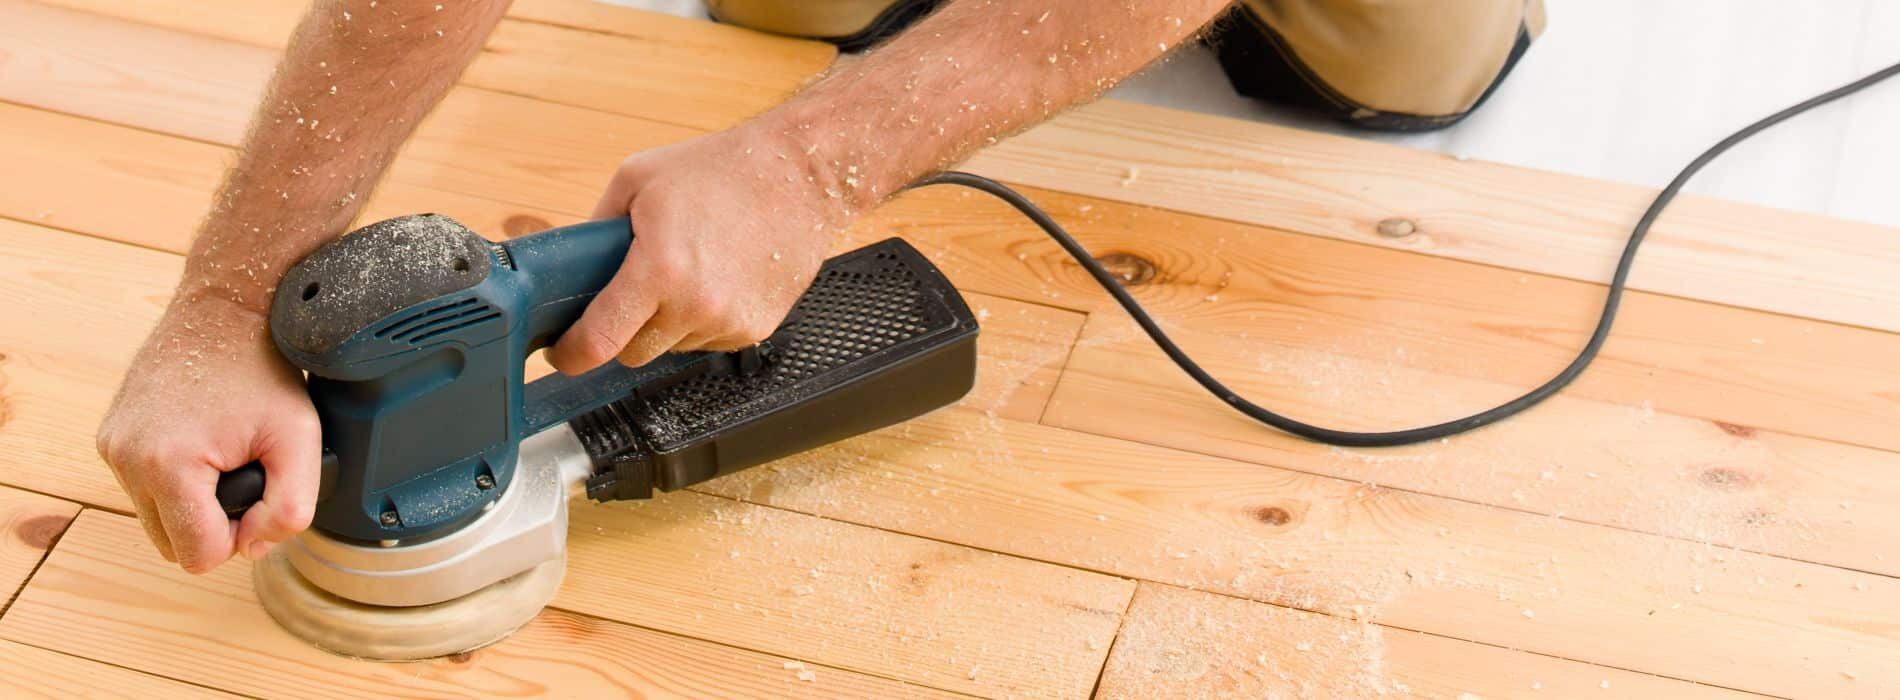 A Mr Sander® in Kingston skilfully uses a 240v wired Makita Orbital Sander, equipped with a 125mm finest grit sanding disc, to effectively remove previous scratches and imperfections on a wooden floor, ensuring a smooth finish.